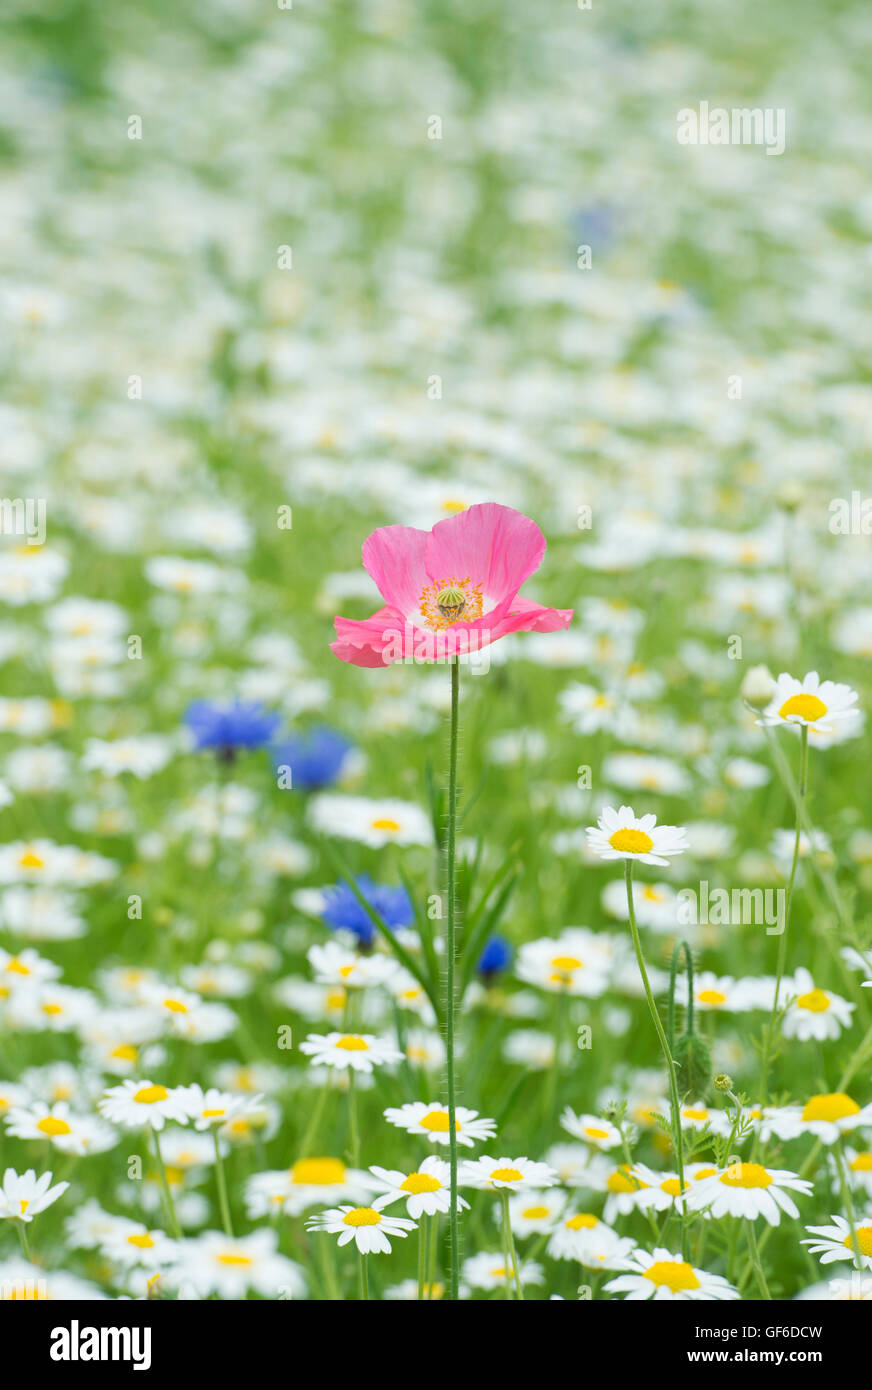 Papaver Rhoeas True Shirley Poppy and Anthemis arvensis / Corn chamomile flowers in a wildflower meadow Stock Photo